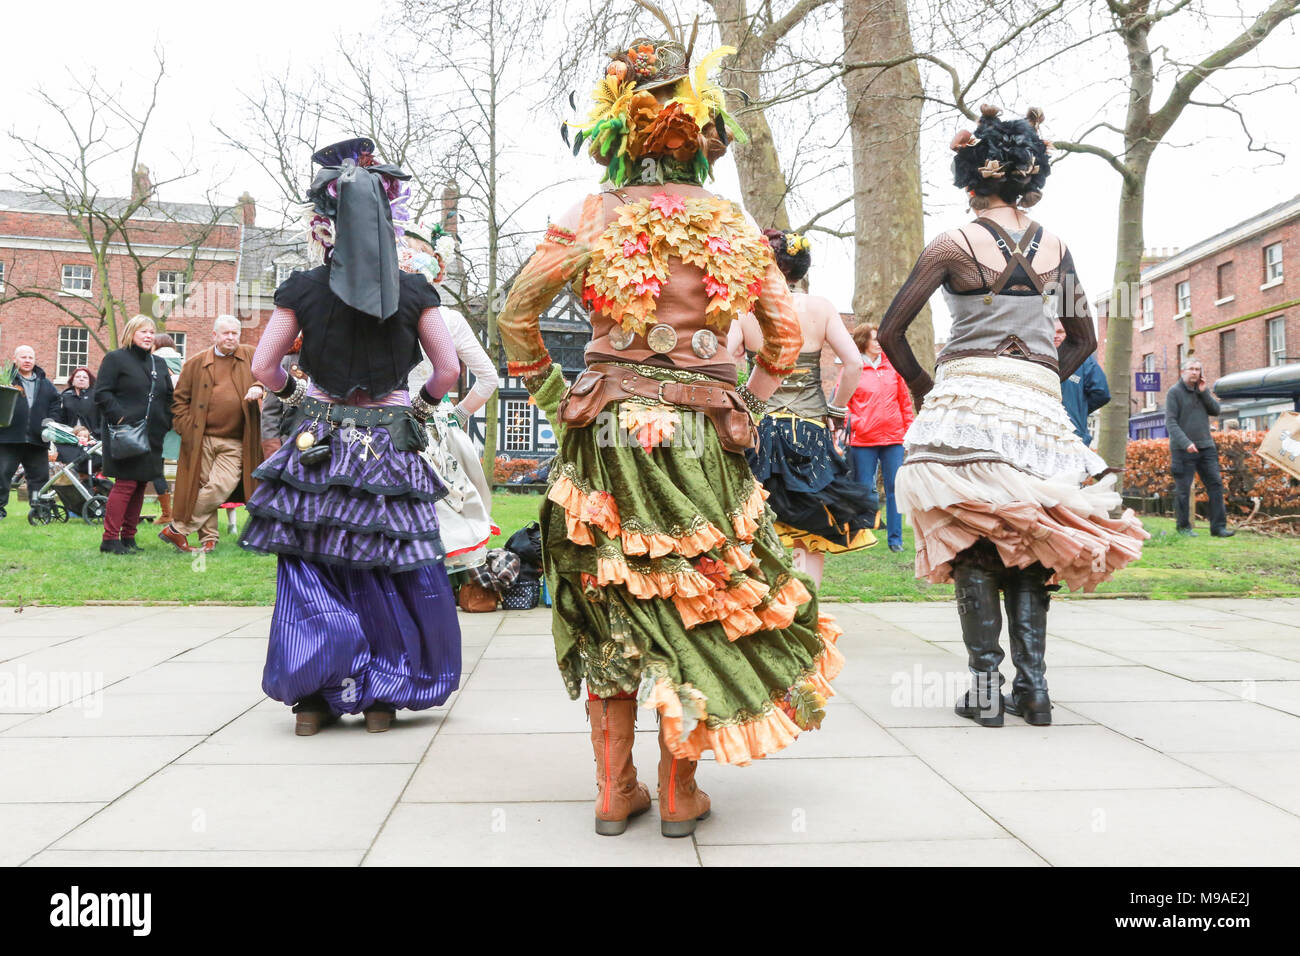 Women performing a steampunk dance. Steampunk is a style of fashion that combines historical elements and anachronistic technology, often inspired by Edwardian science fiction. Peter Lopeman/Alamy Live News Stock Photo